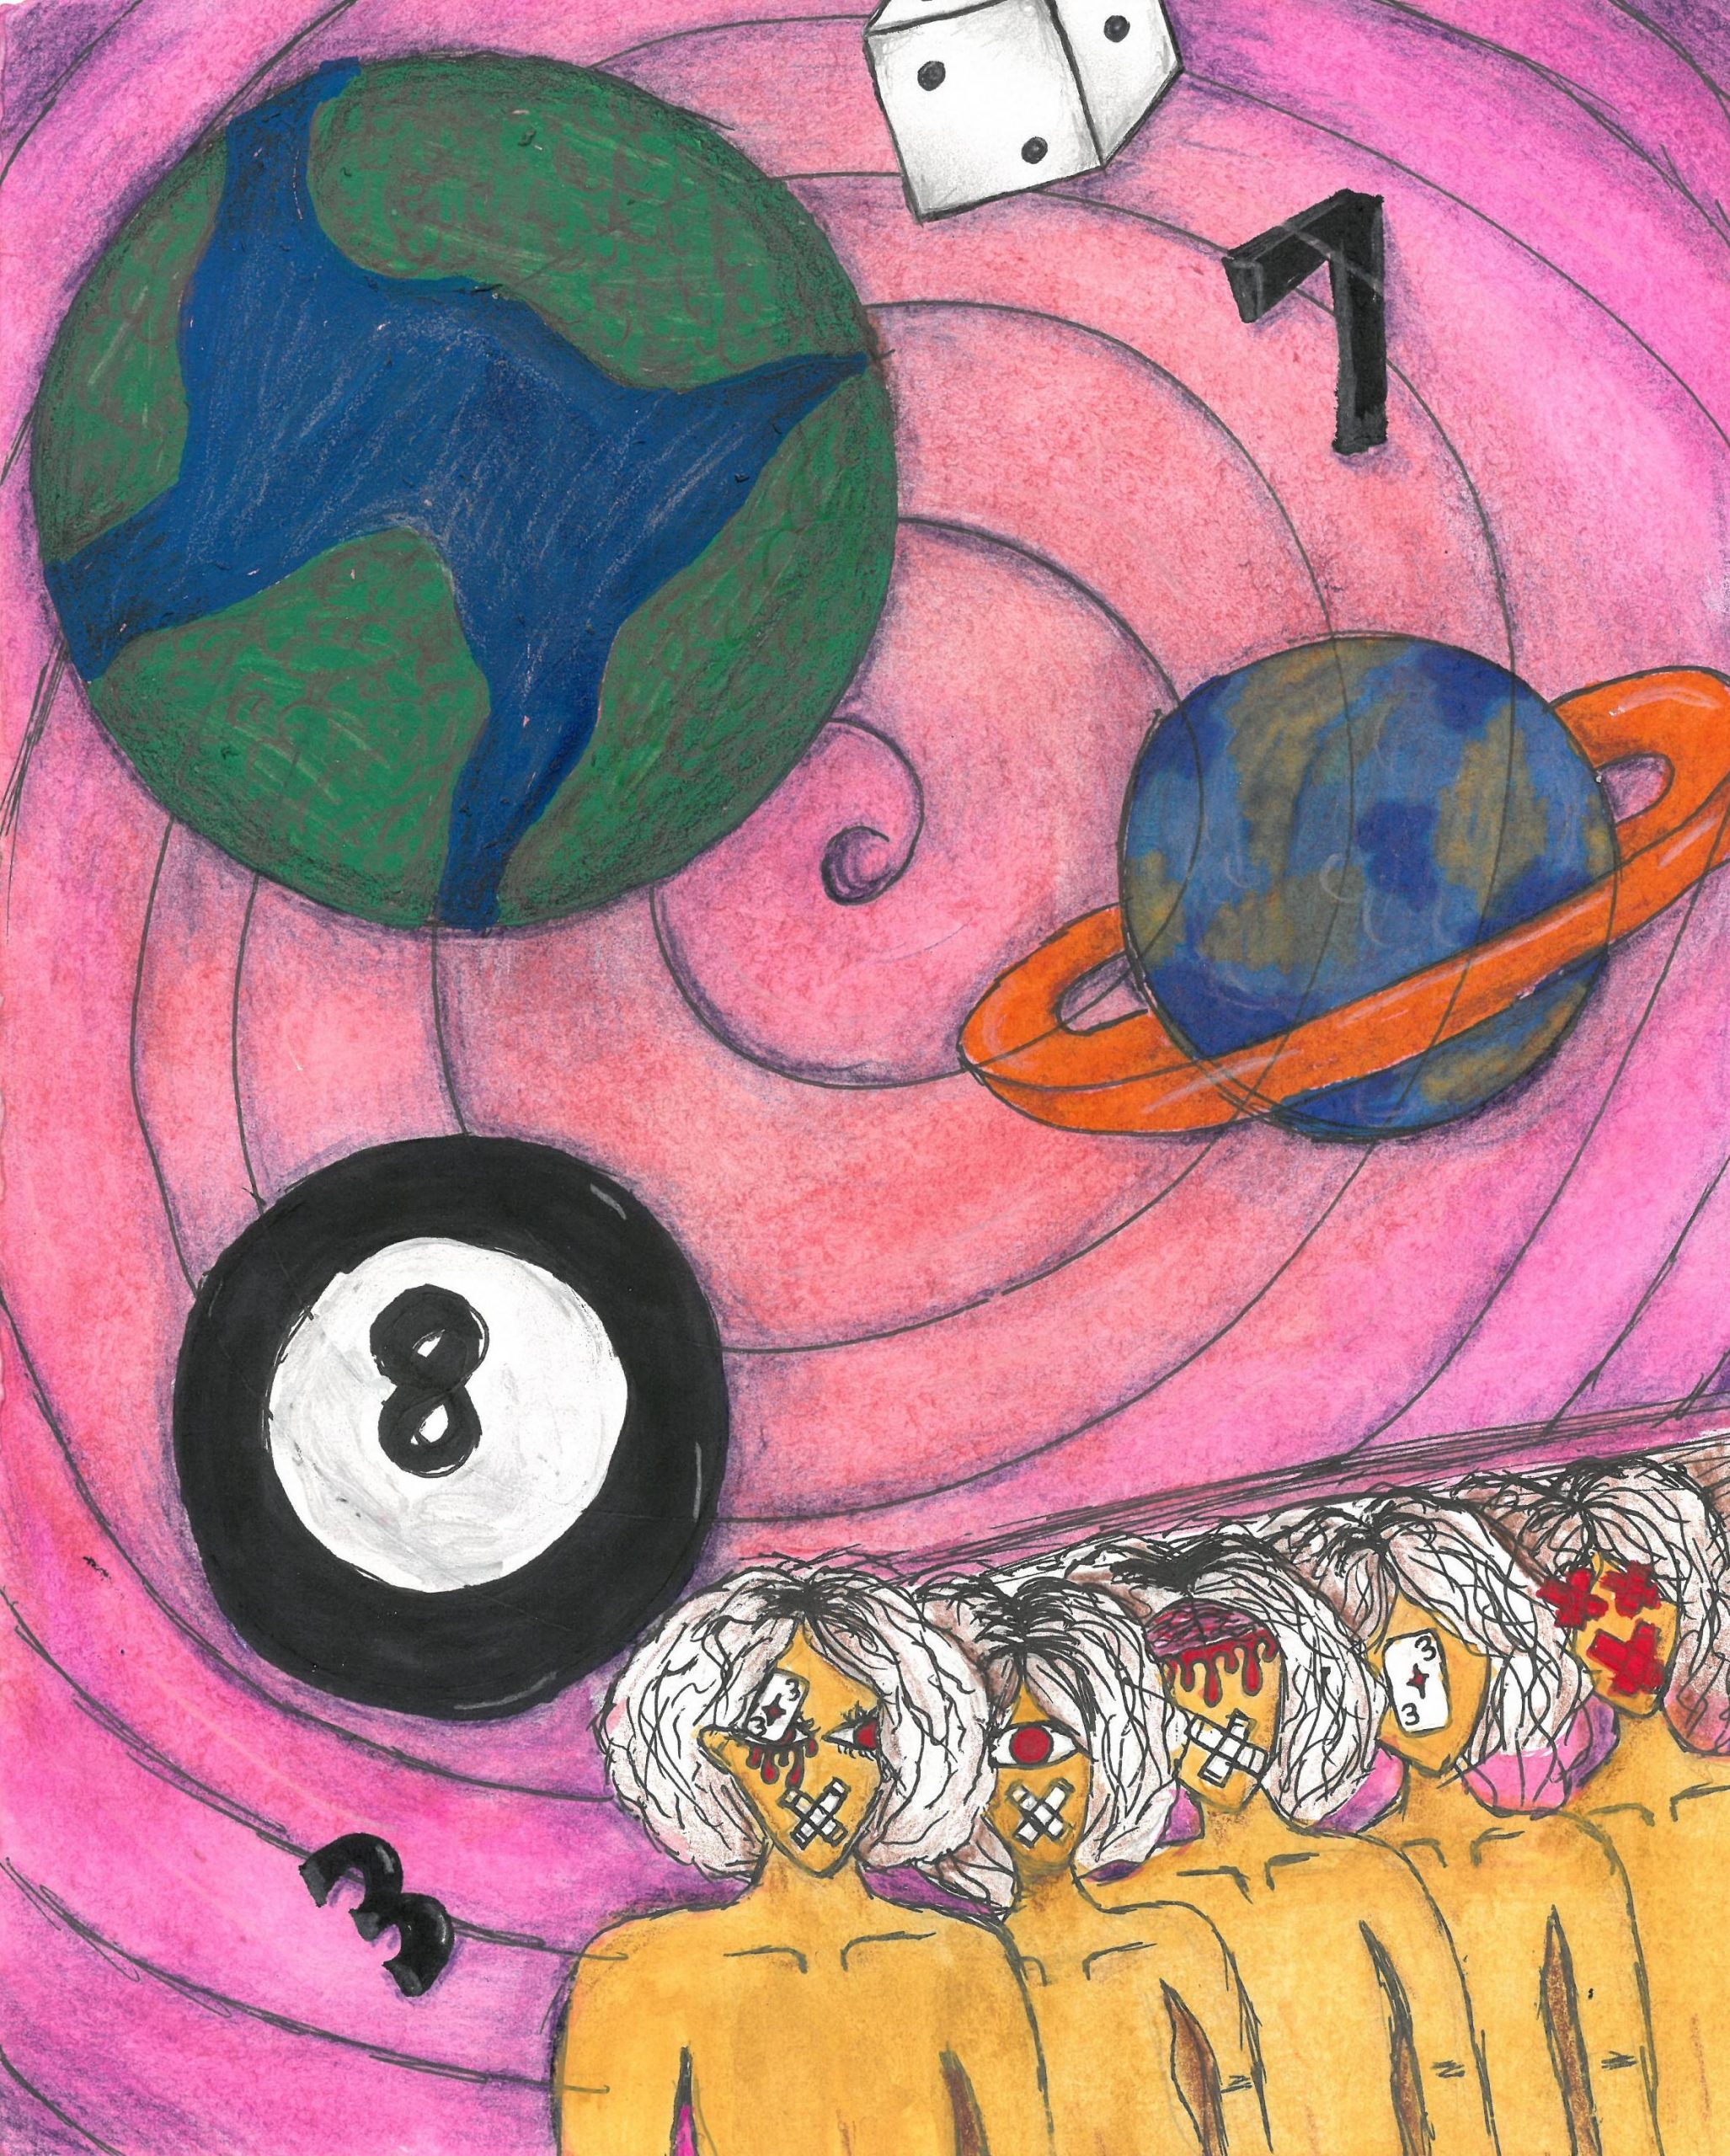 An 8-ball, Saturn, Earth orbiting with several naked humans below